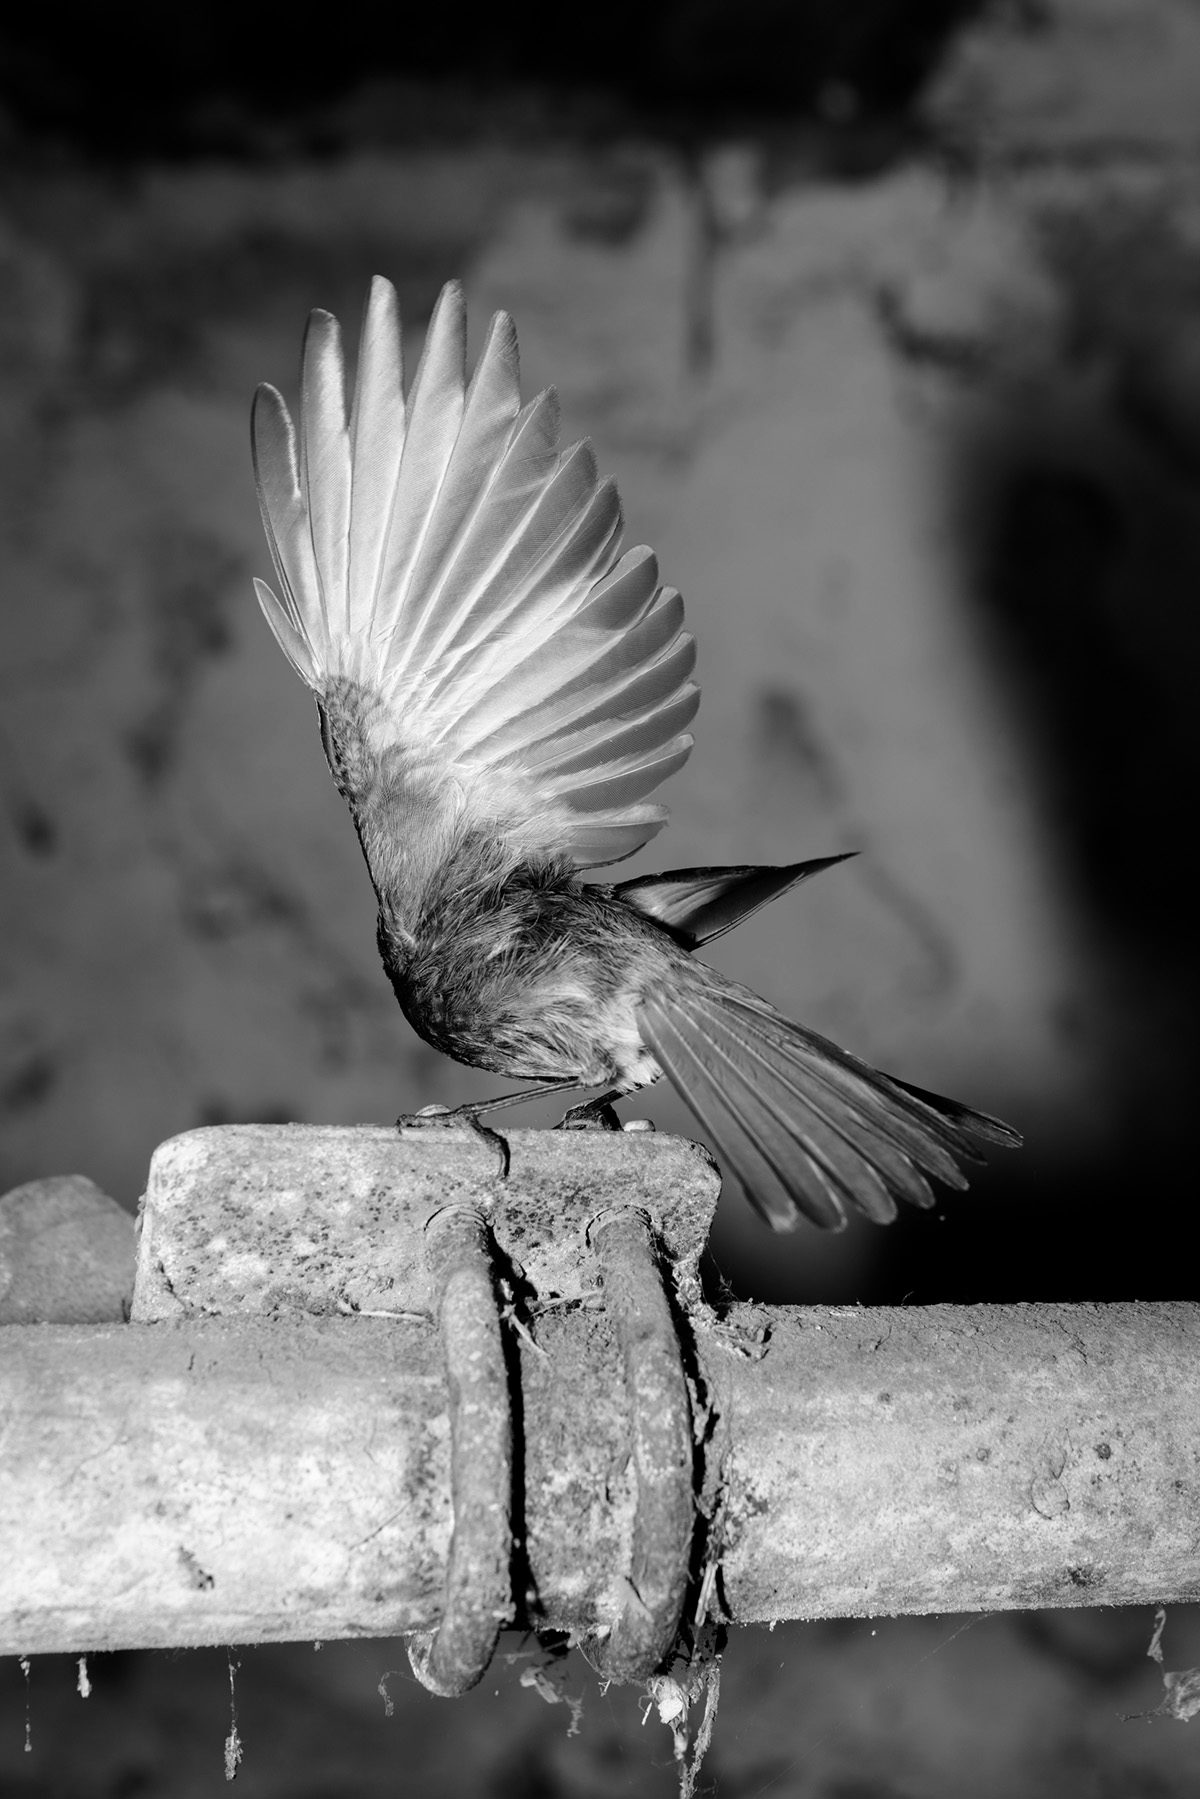 Black and white photograph from Plexus by Elena Helfrecht showing a bird standing on a pipe with its wing fanned out